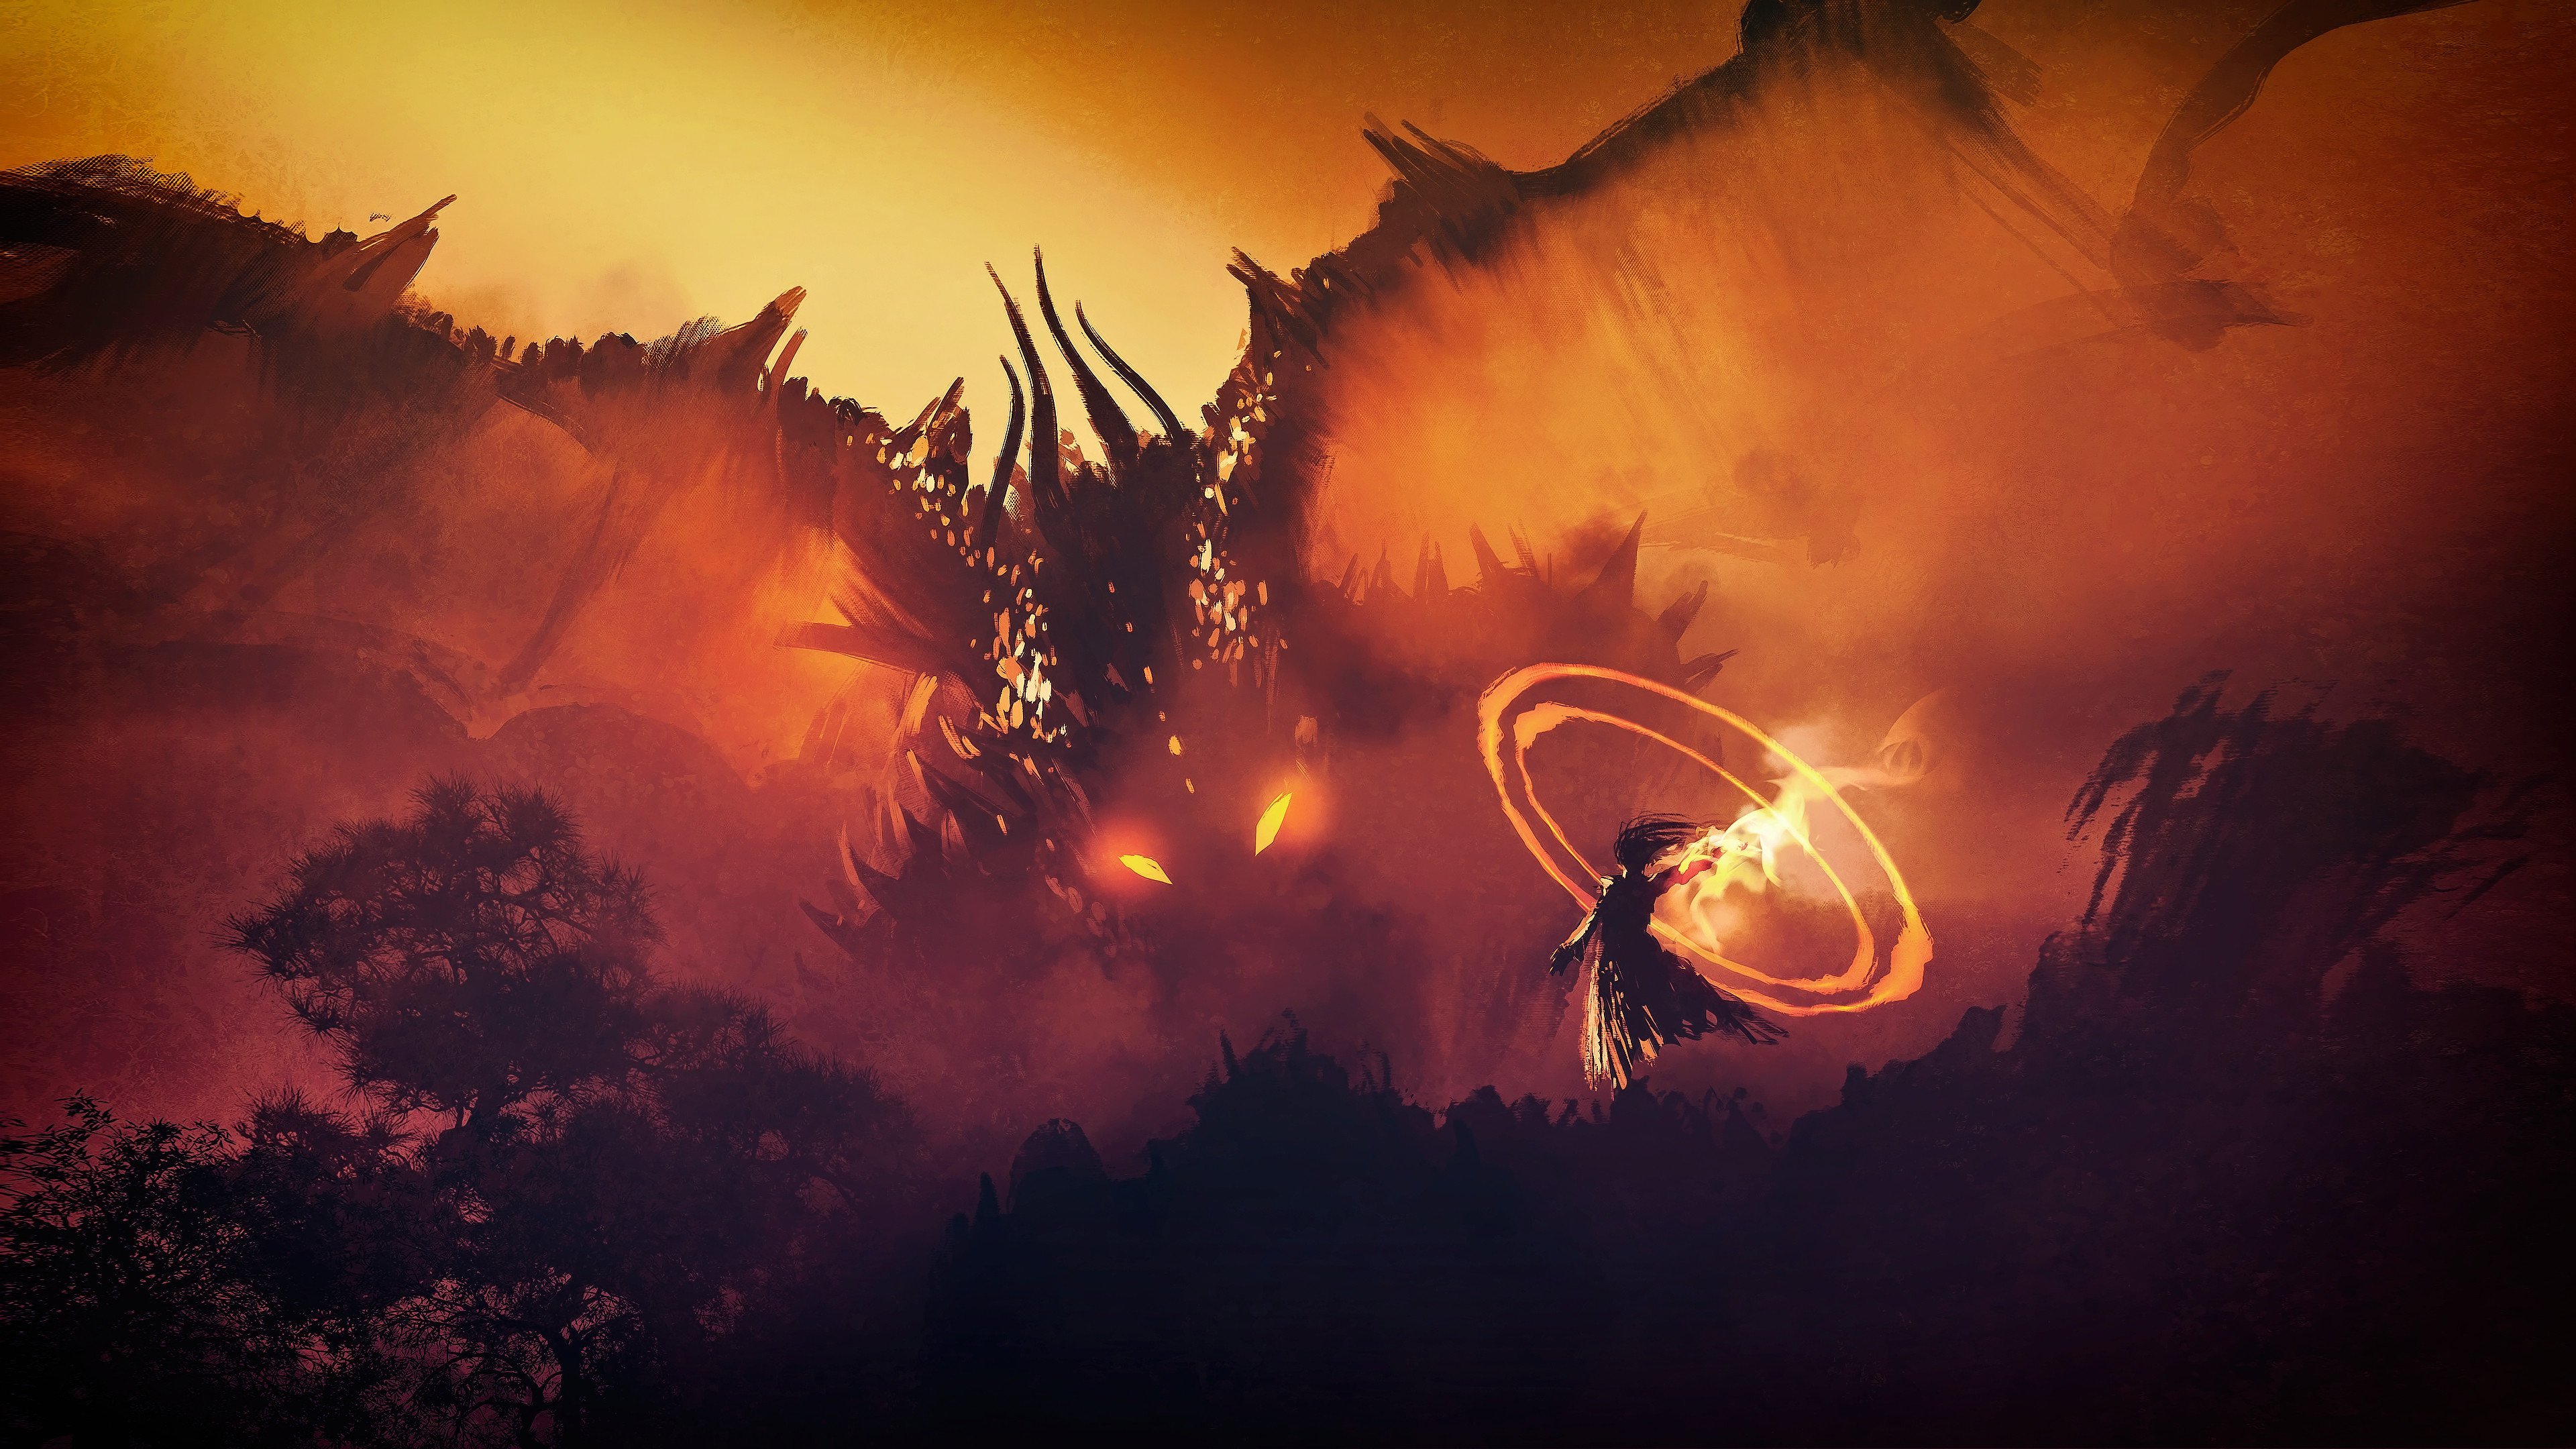 Dragon 4K wallpaper for your desktop or mobile screen free and easy to download